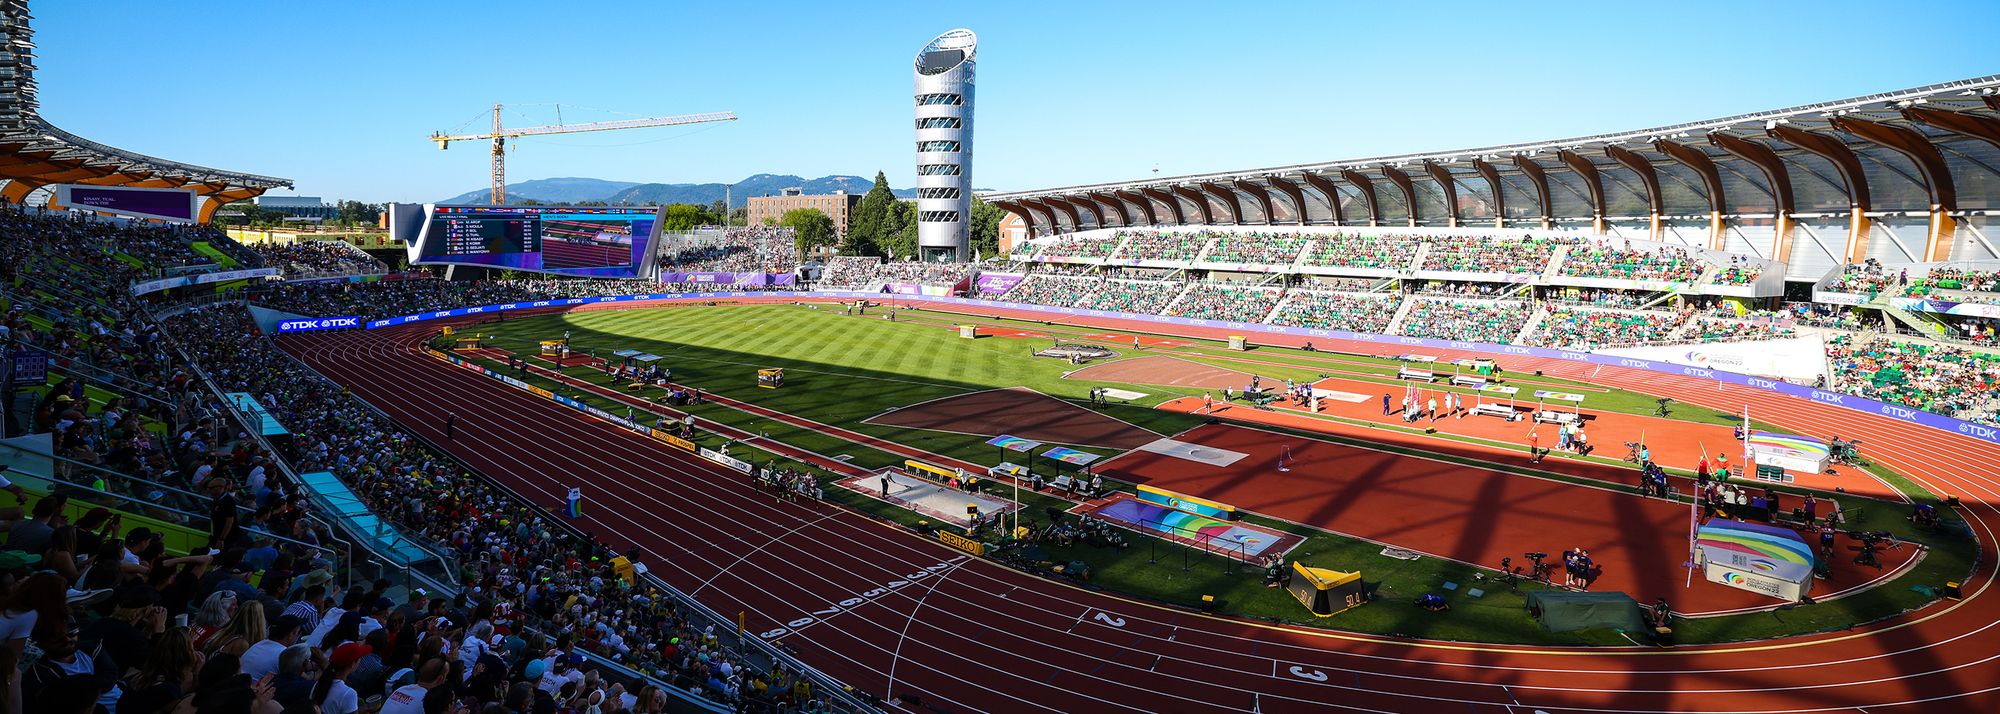 Organisers of more than 300 one-day competition series events and label road races have been introduced to the system and the Athletics for a Better World Standard since it was unveiled.